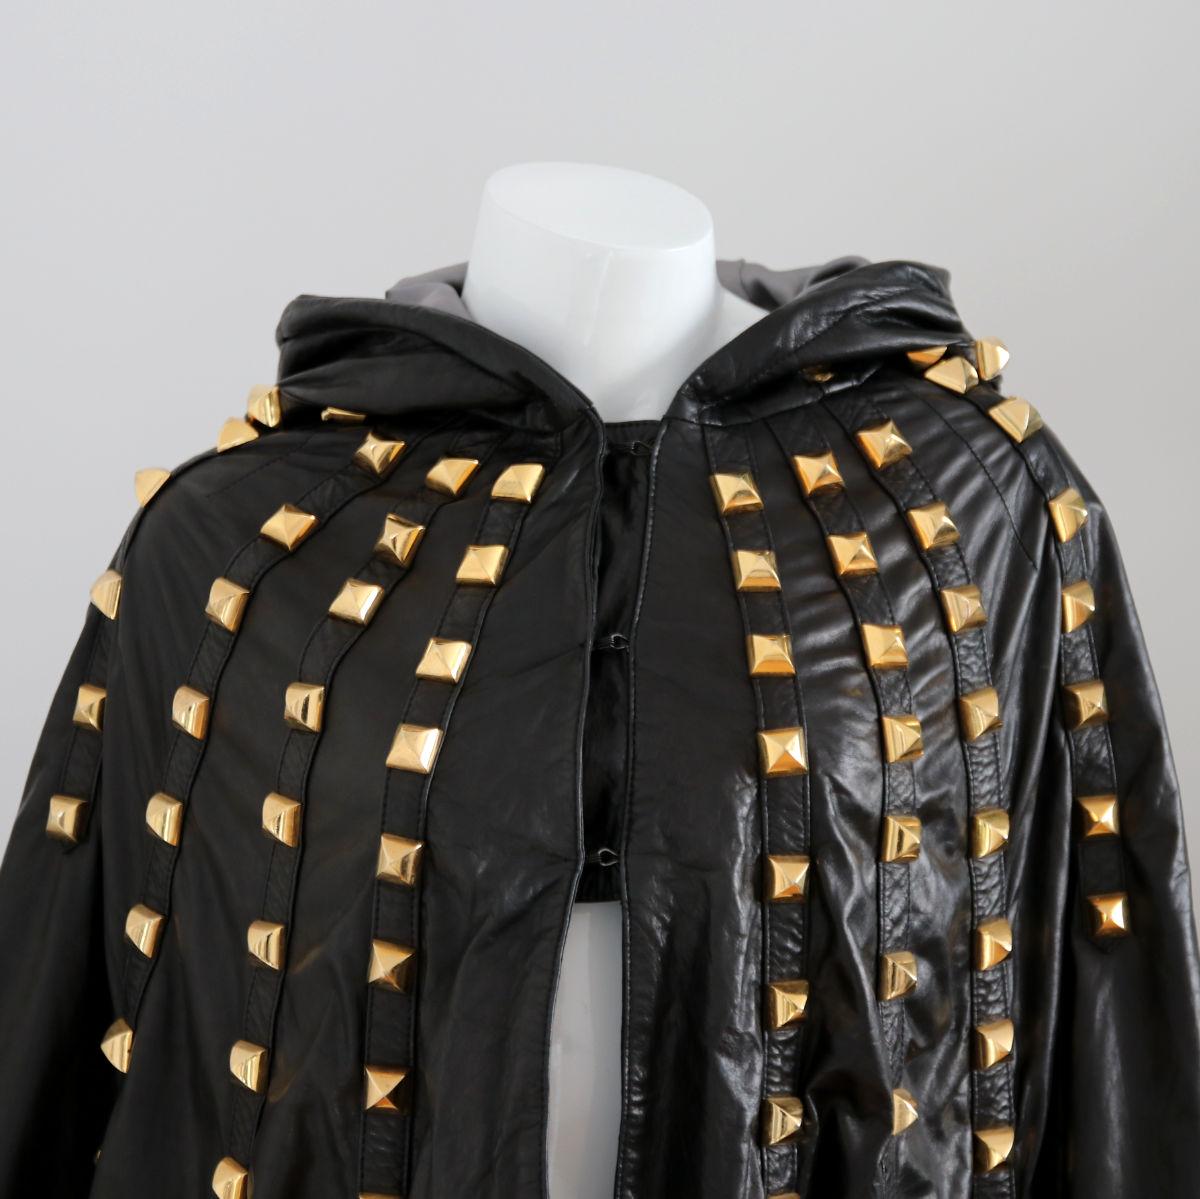 PHILIPP PLEIN

2010s. Black leather cape with hood and studs from Philipp Plein.

Buy Now Or Cry Later!

The cape is in good condition (see photos).
Minimal abrasion on the hardware.